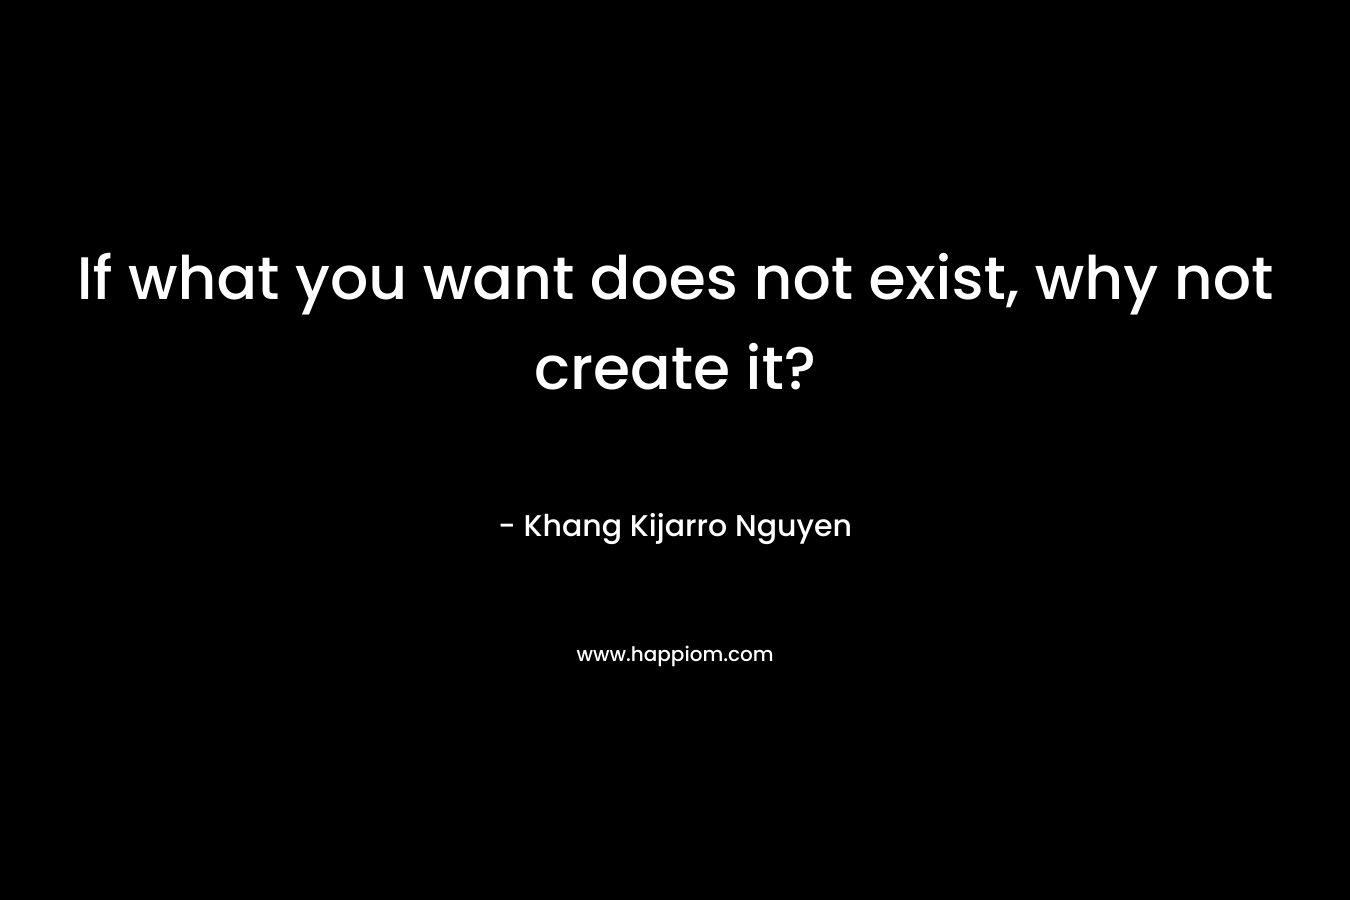 If what you want does not exist, why not create it?